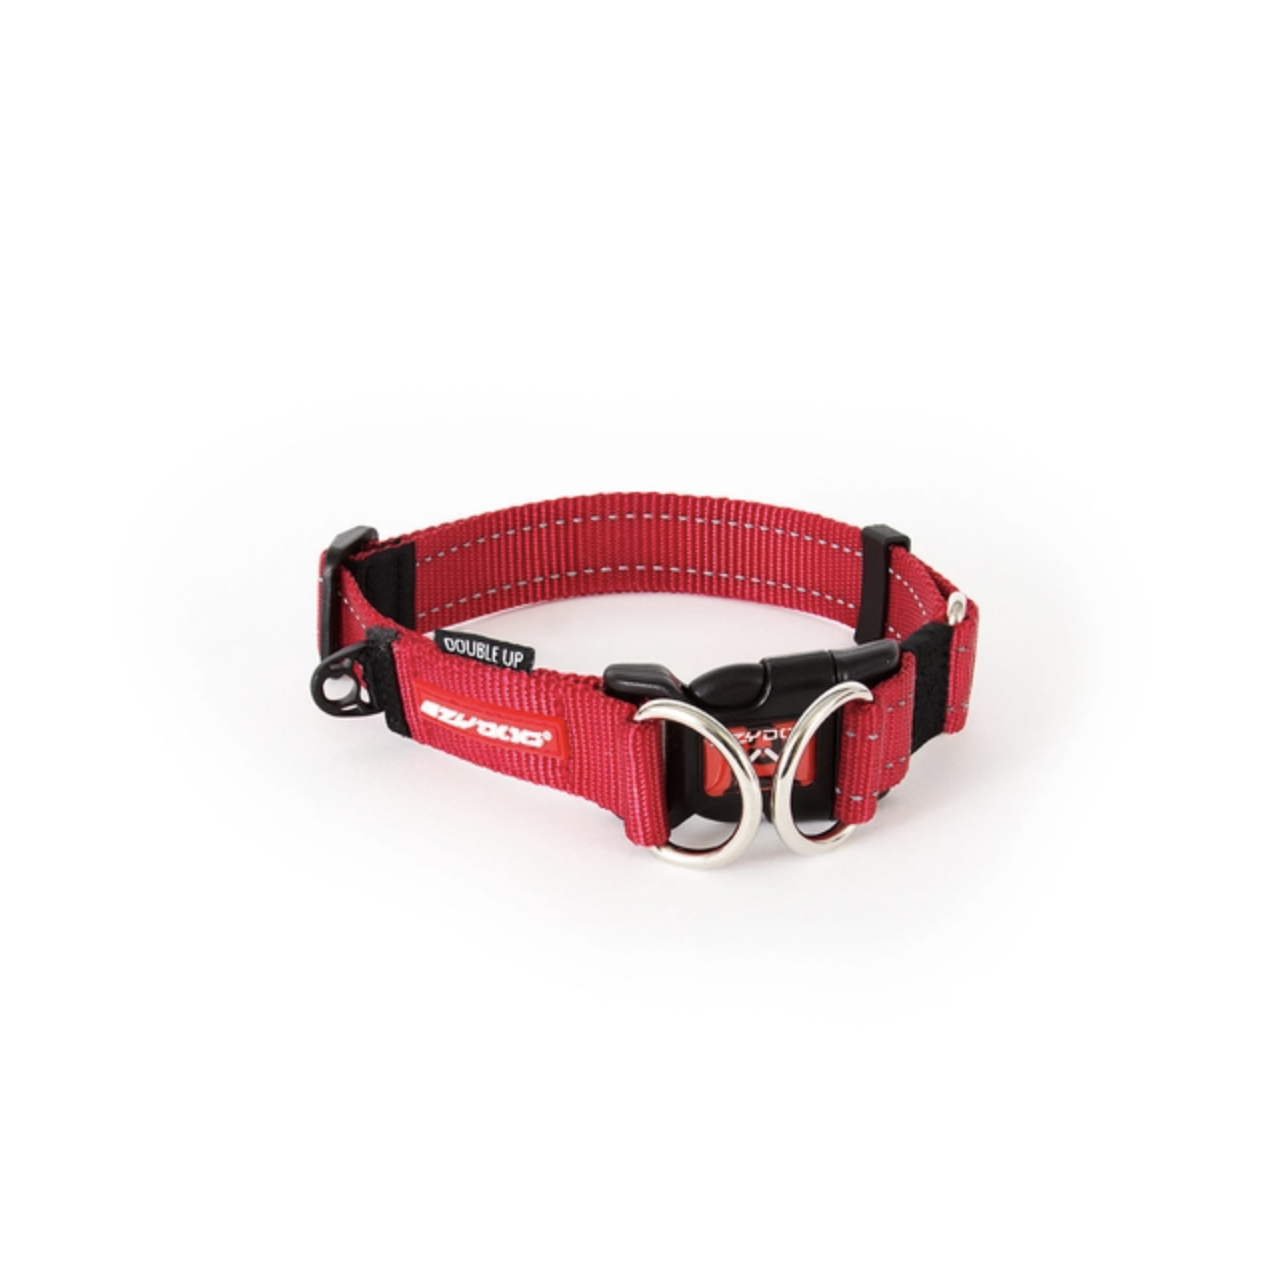 EzyDog Double Up Collar - Red X-LARGE